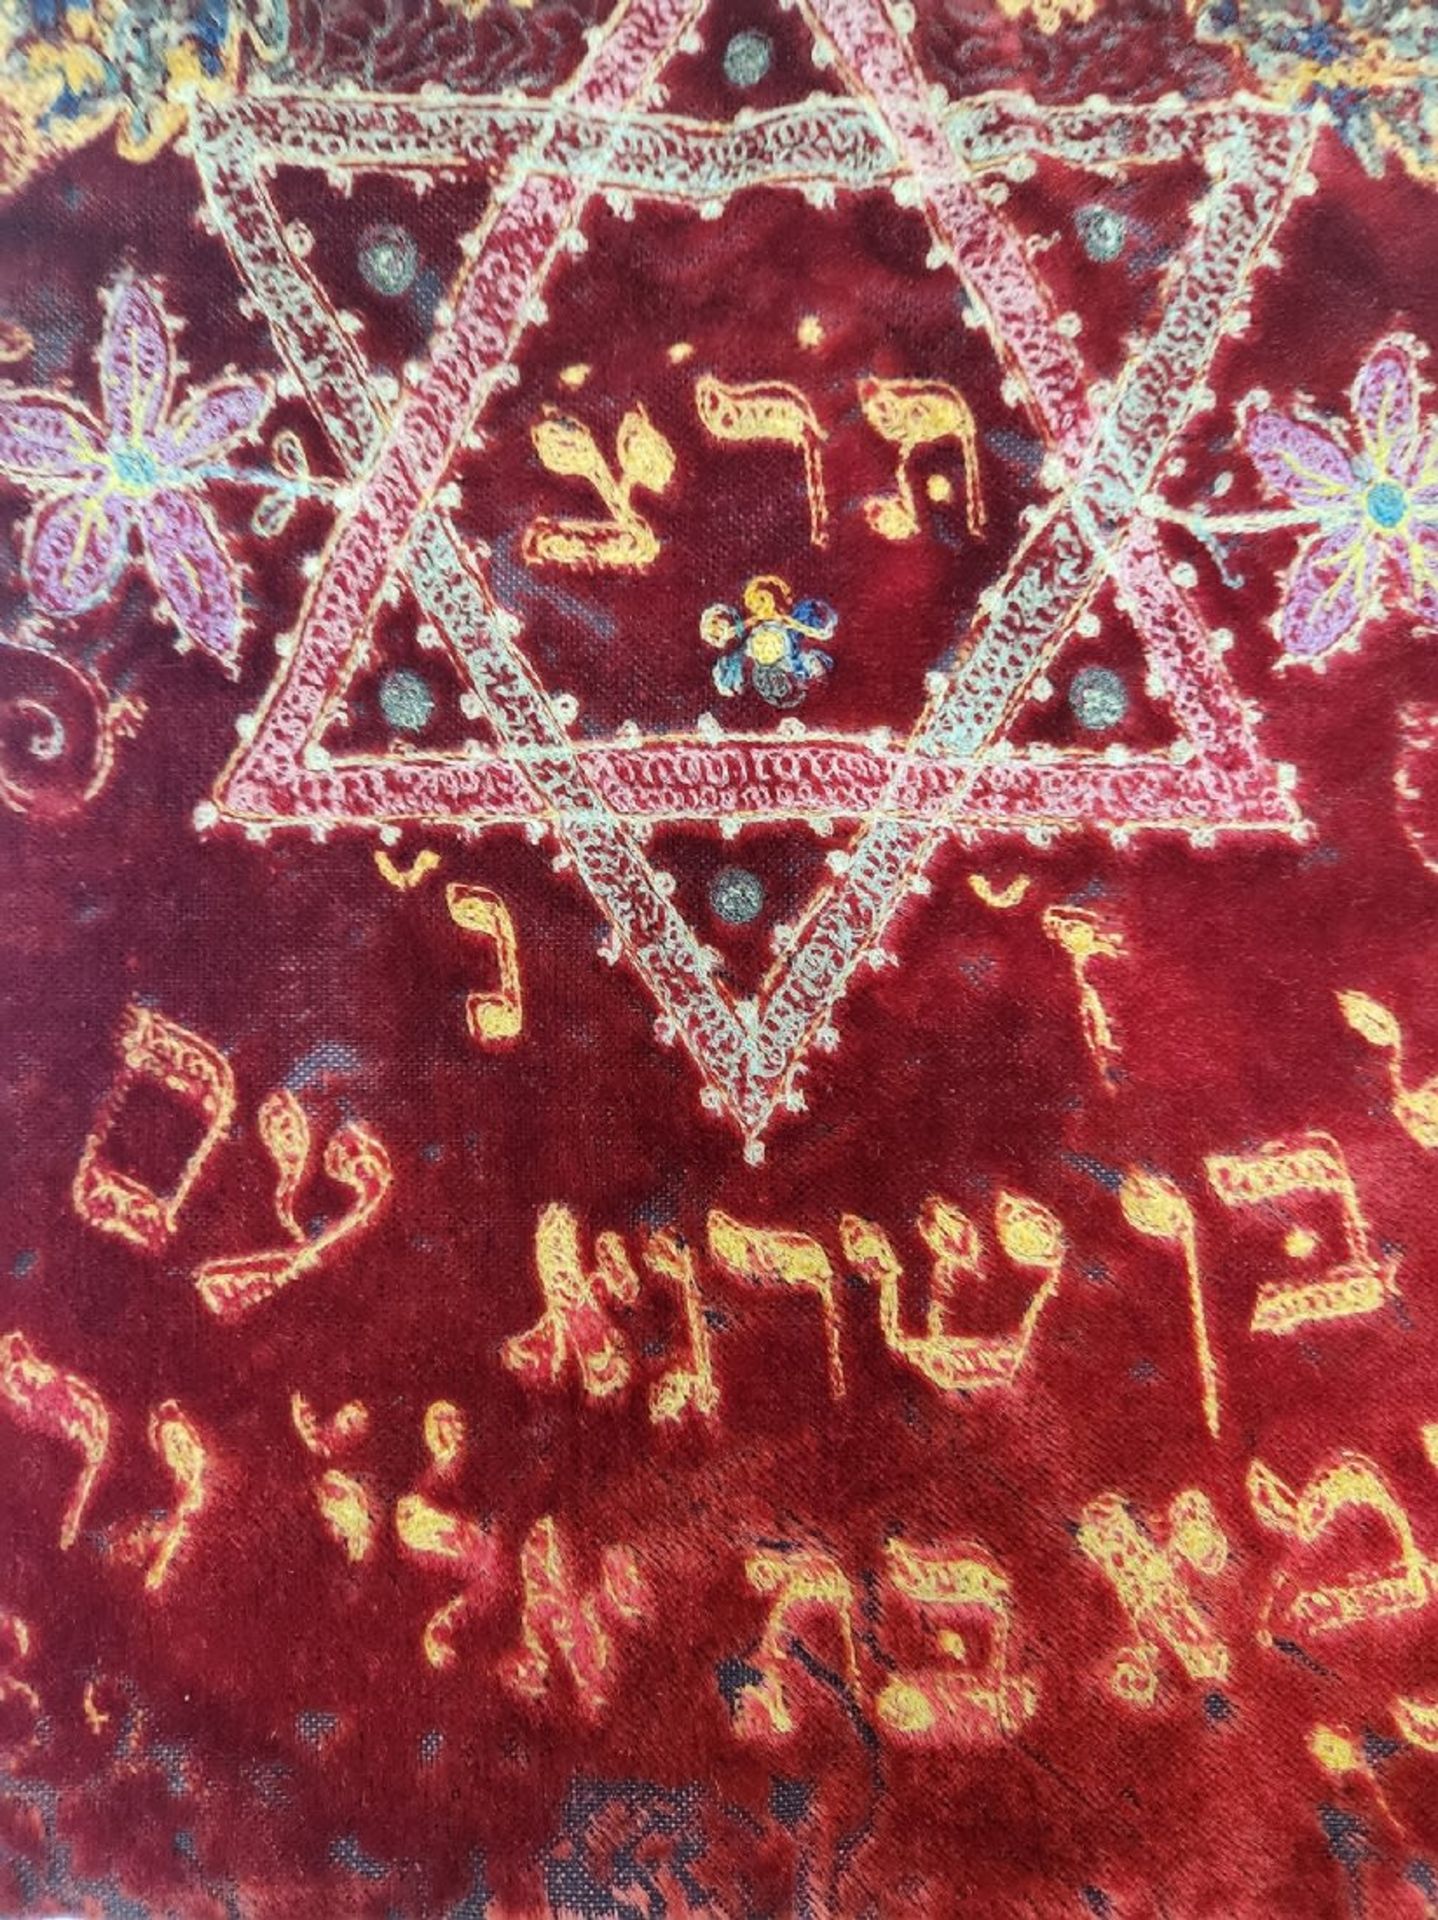 A Torah scroll coat, embroidered with cotton threads on red velvet, dating from 1929, the subject of - Image 4 of 4